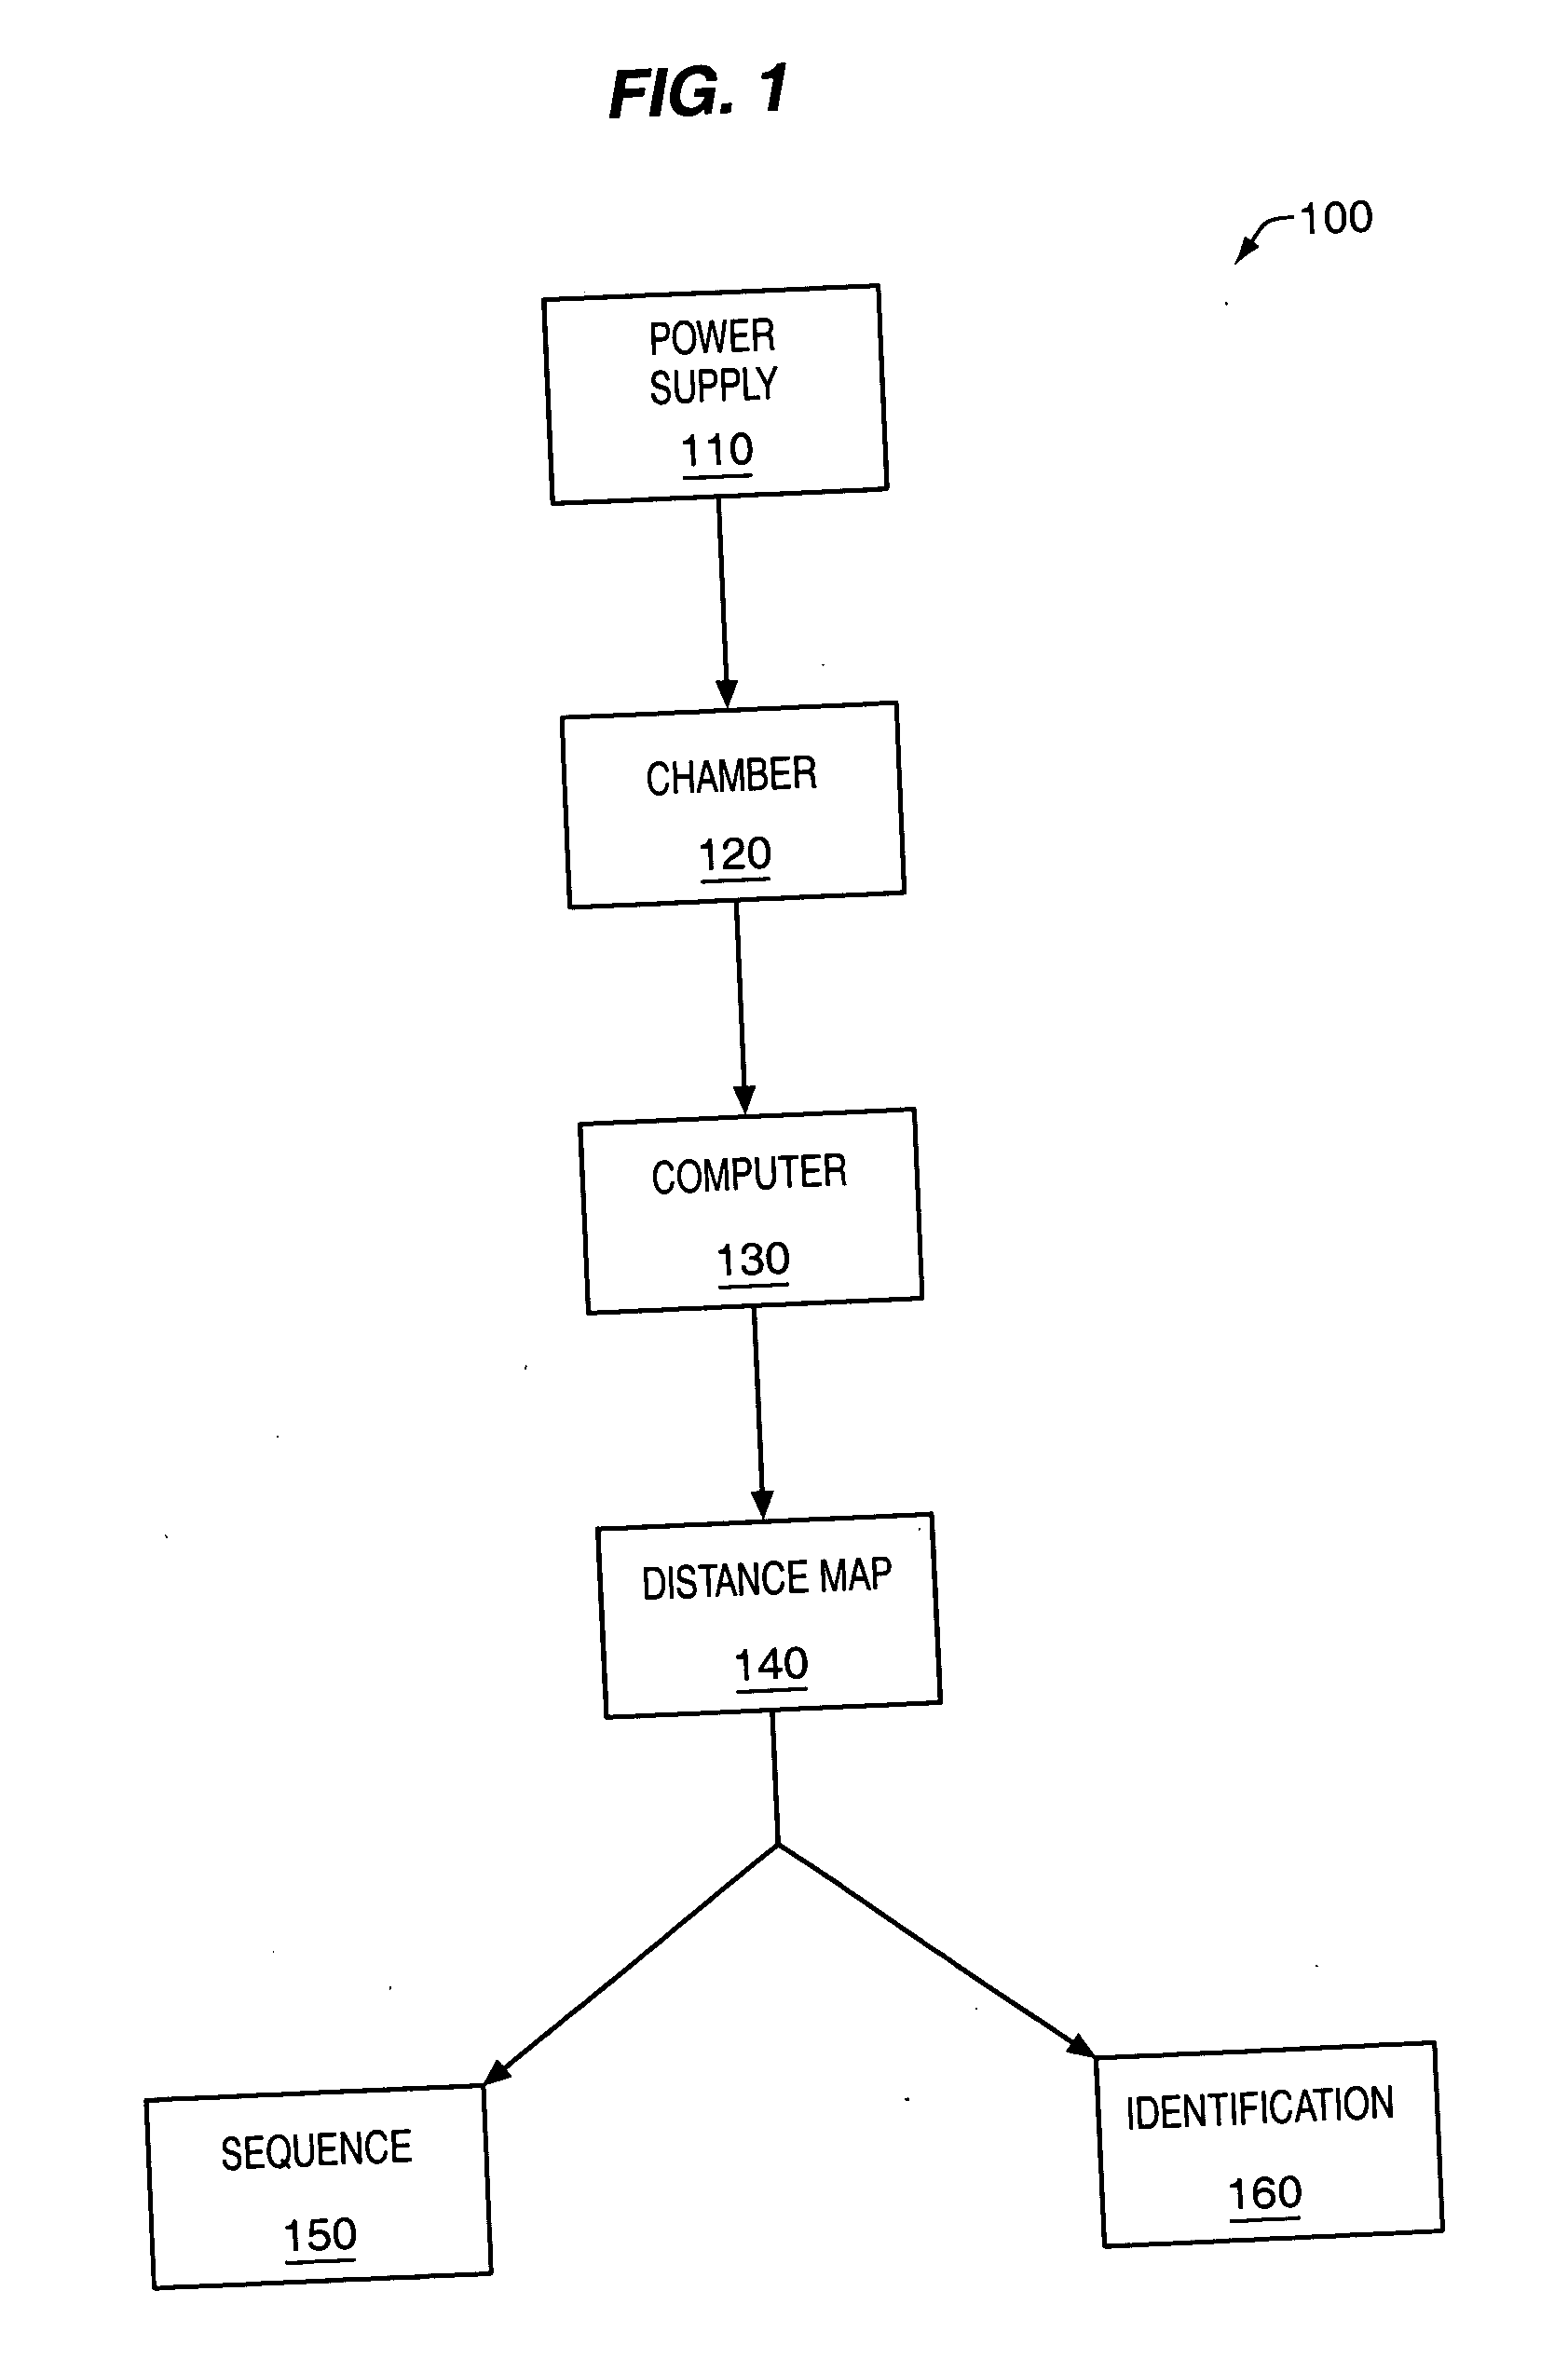 Methods and device for analyte characterization